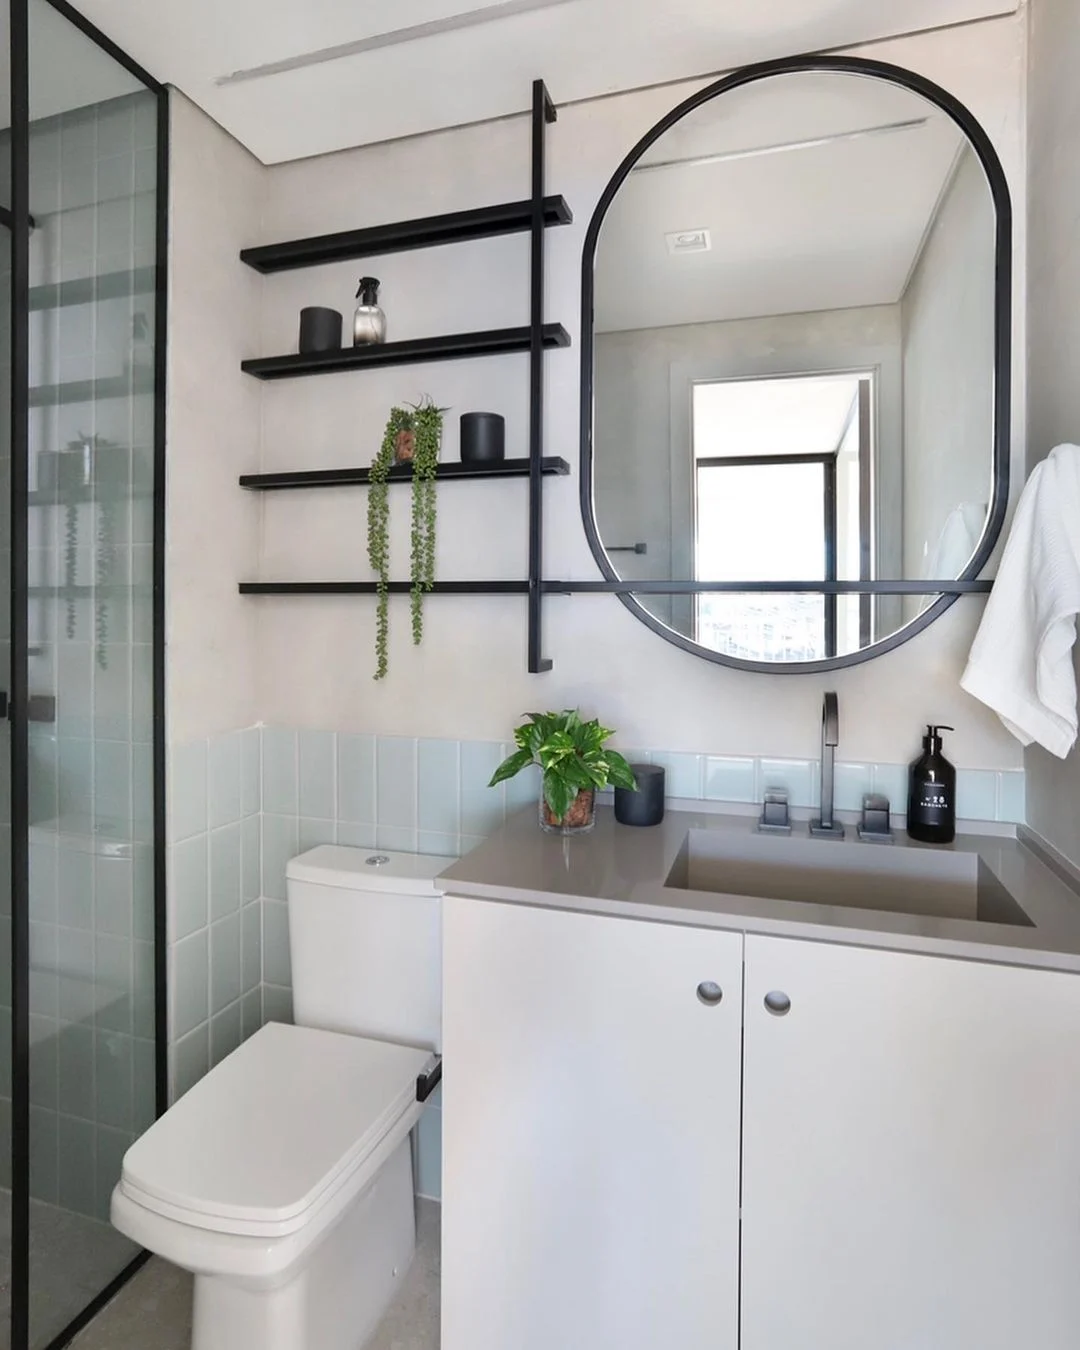 6 simple tips for decorating small bathrooms